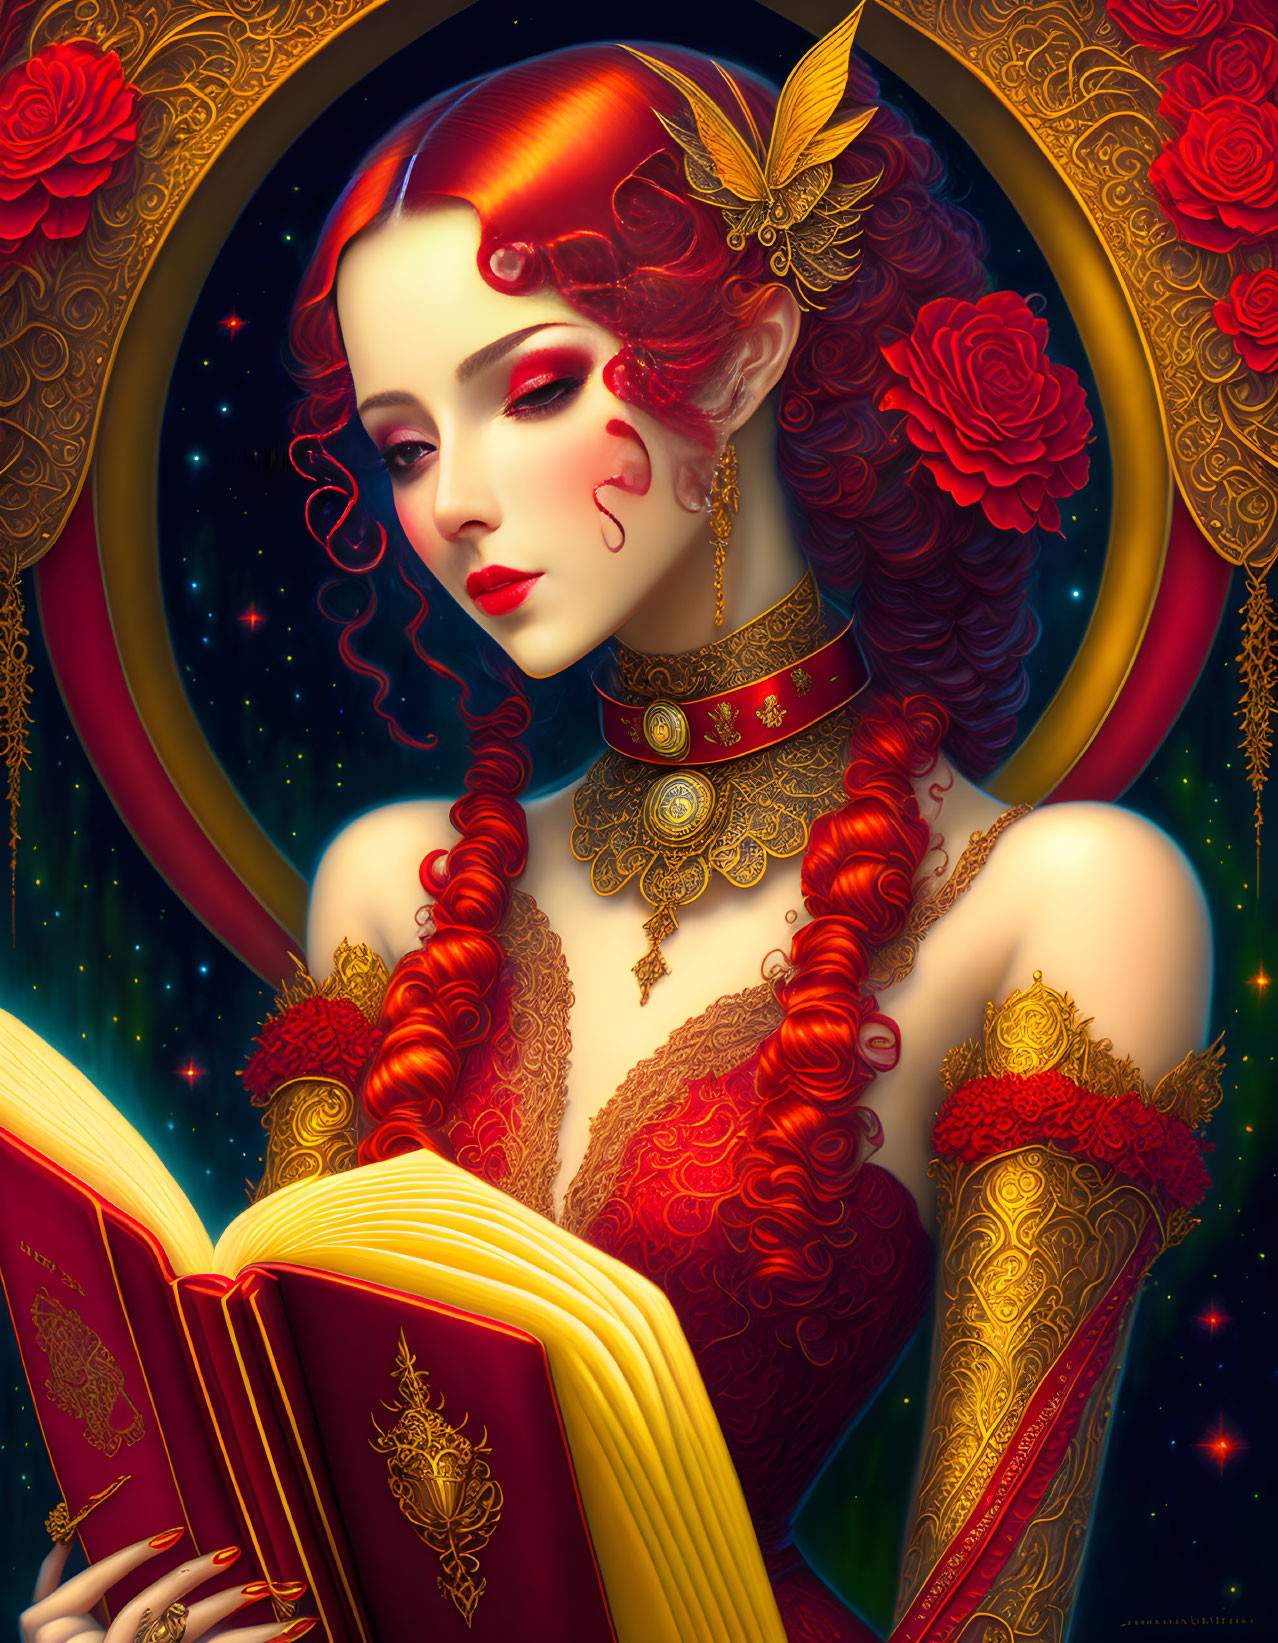 Colorful Illustration of Woman in Red and Gold Attire Holding Book